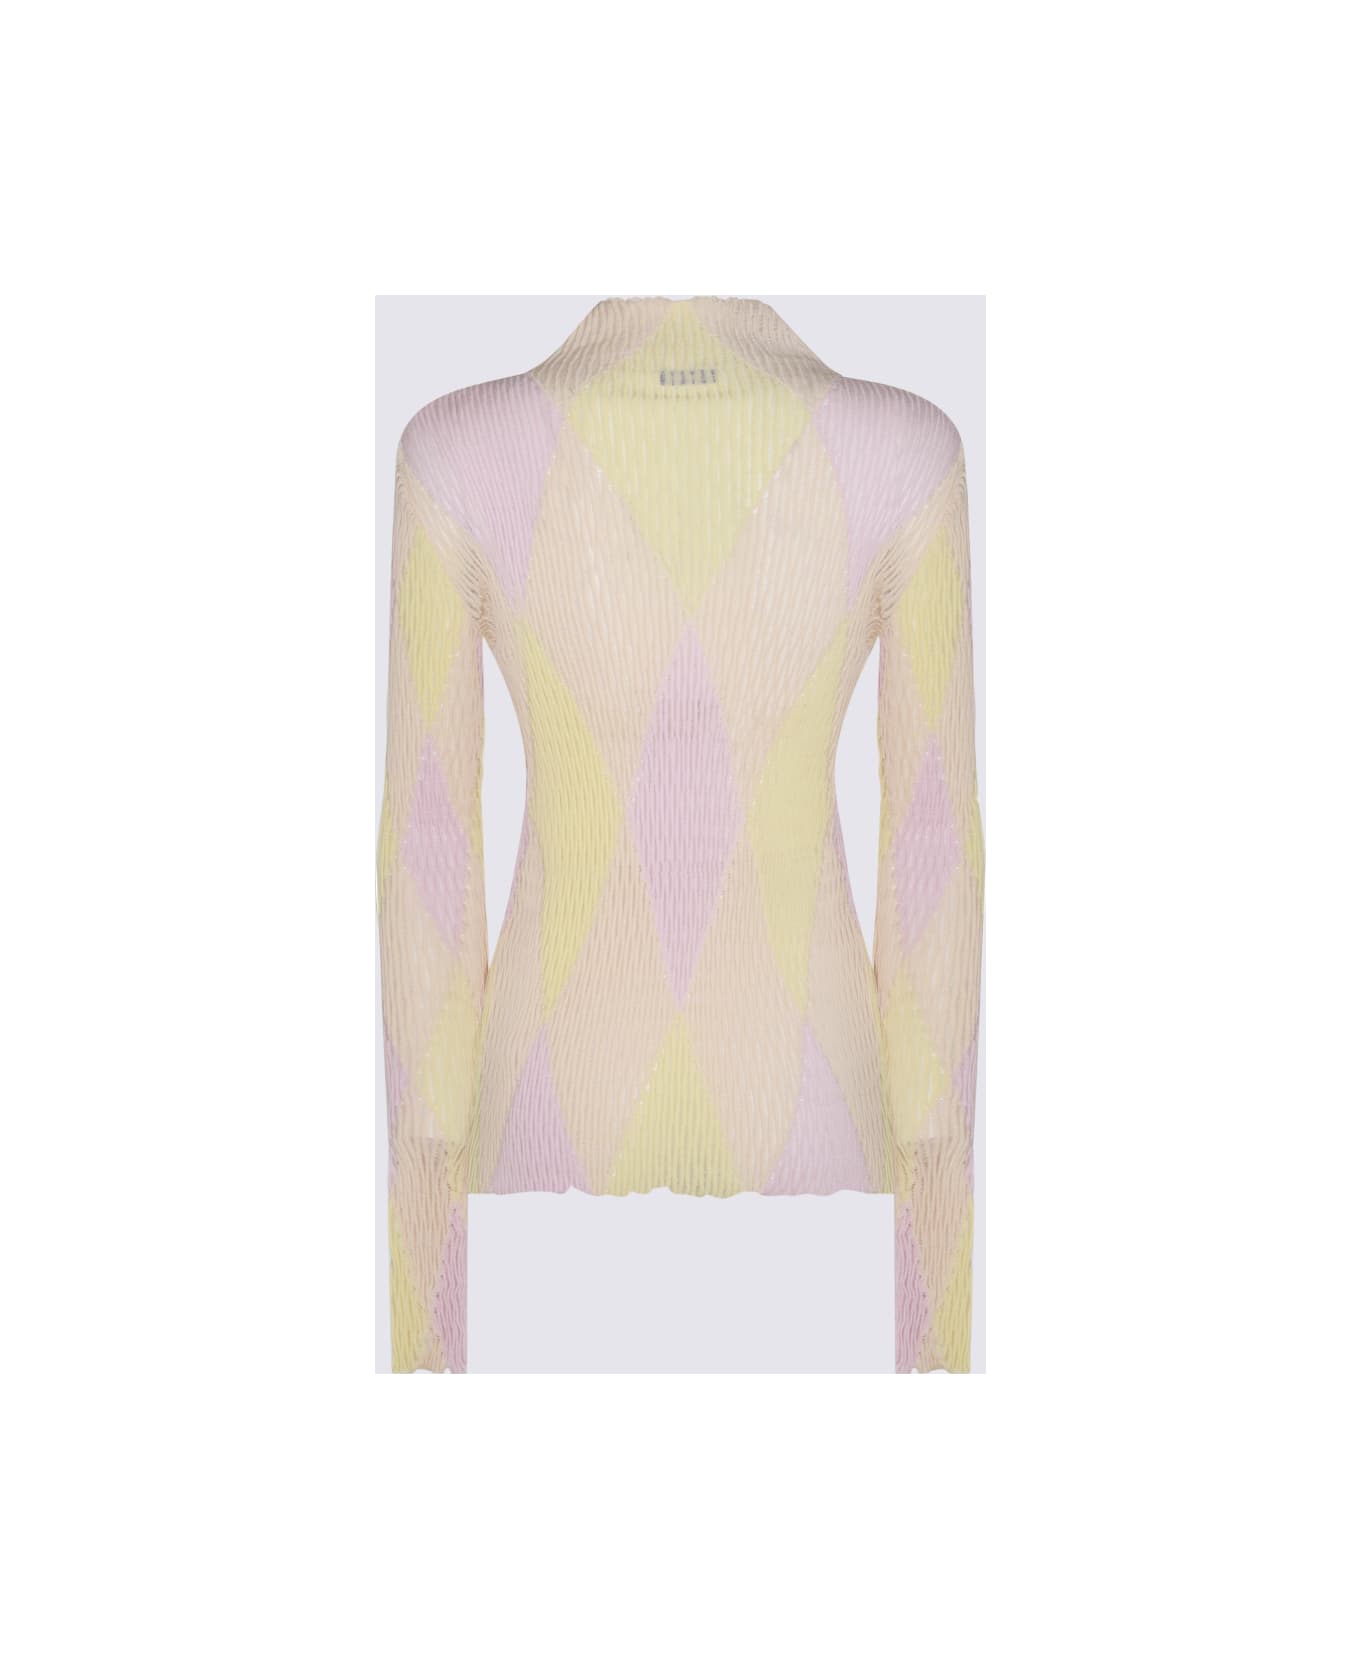 Burberry White And Cream Cotton Knitwear - CAMEO IP PTTN